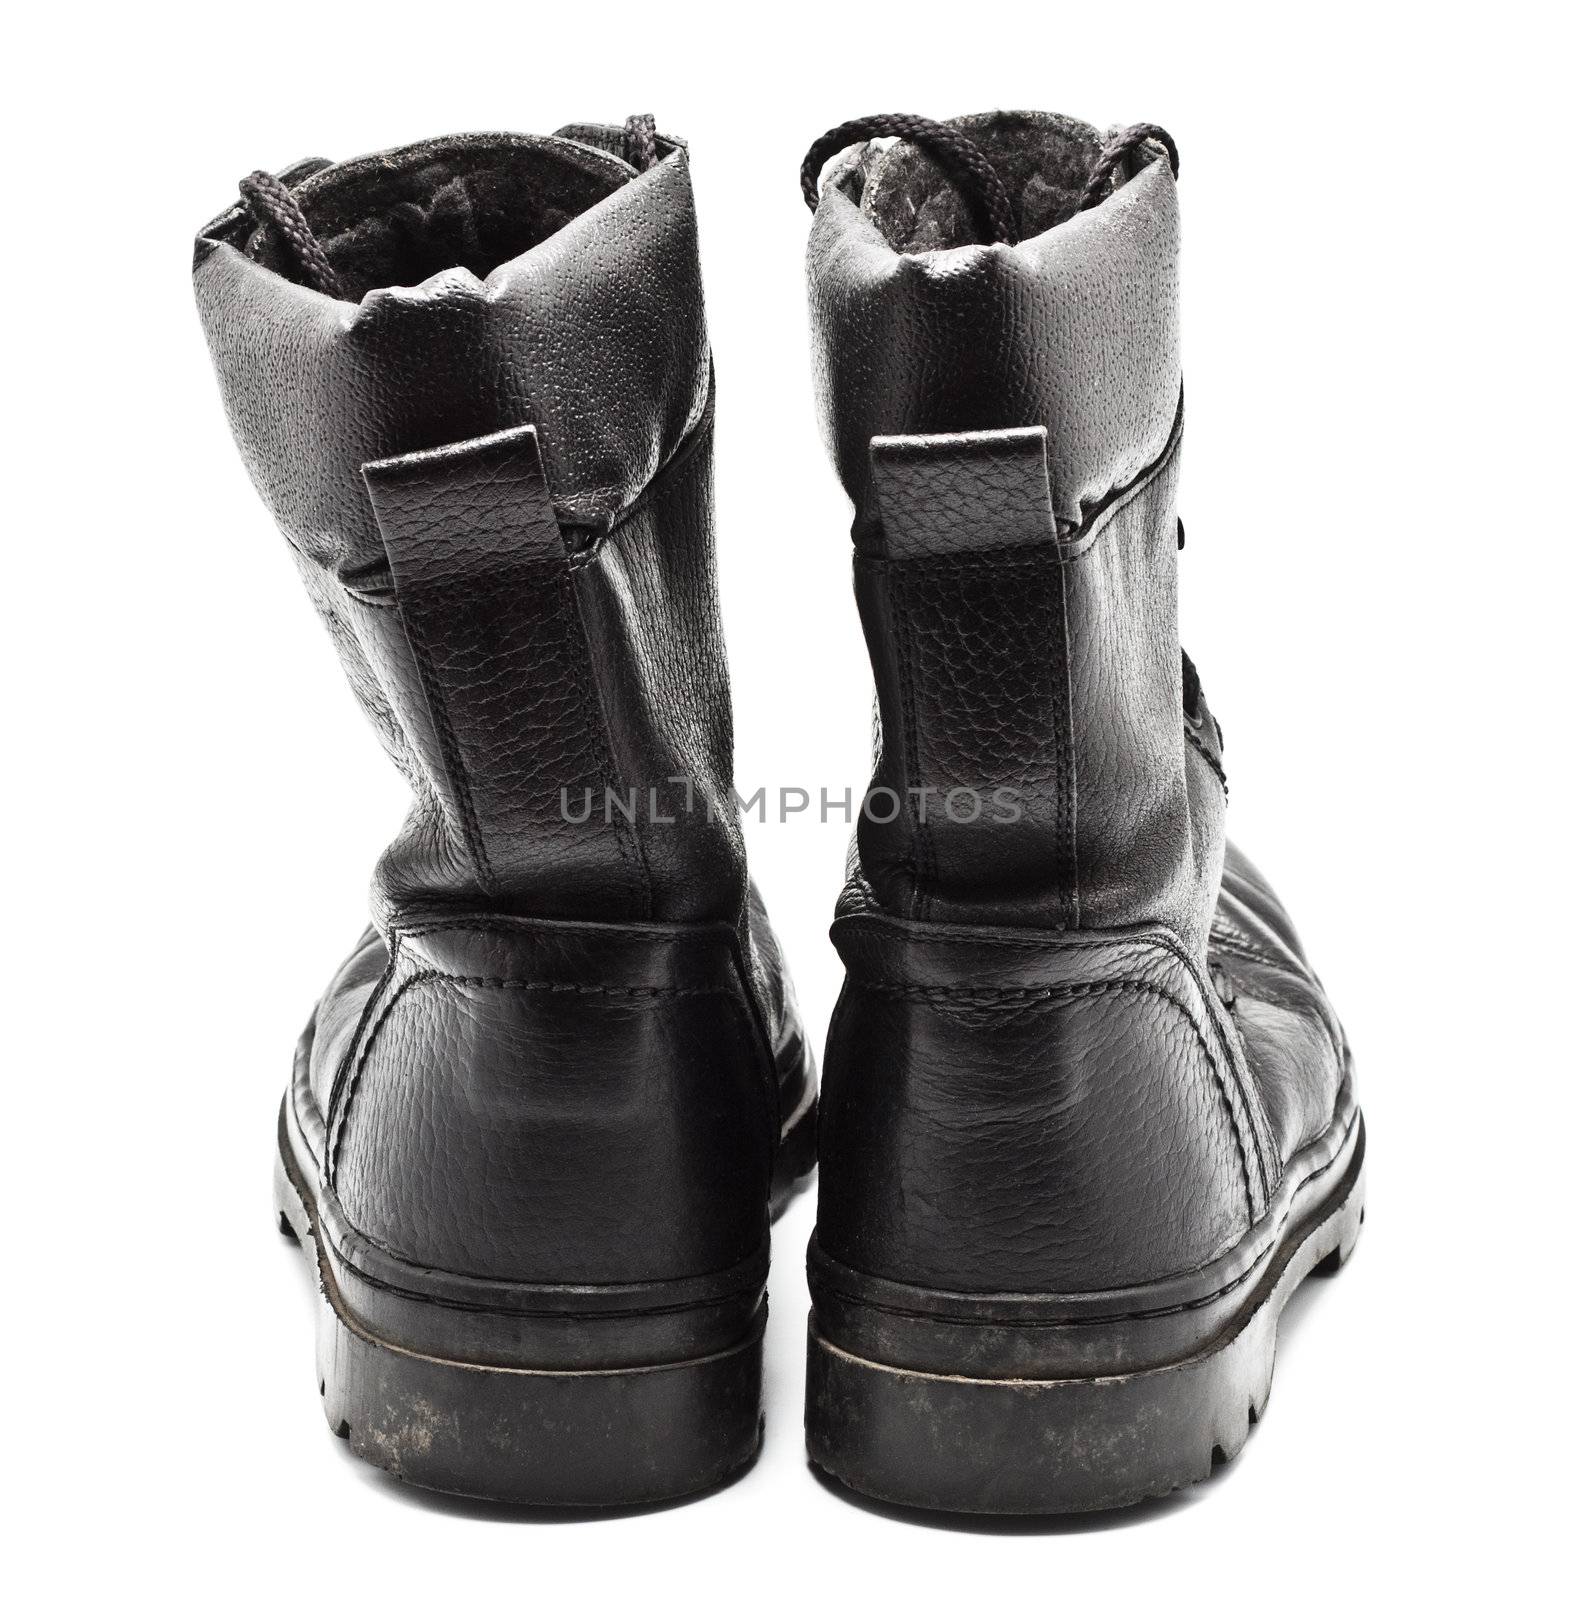 black leather army boots isolated on white